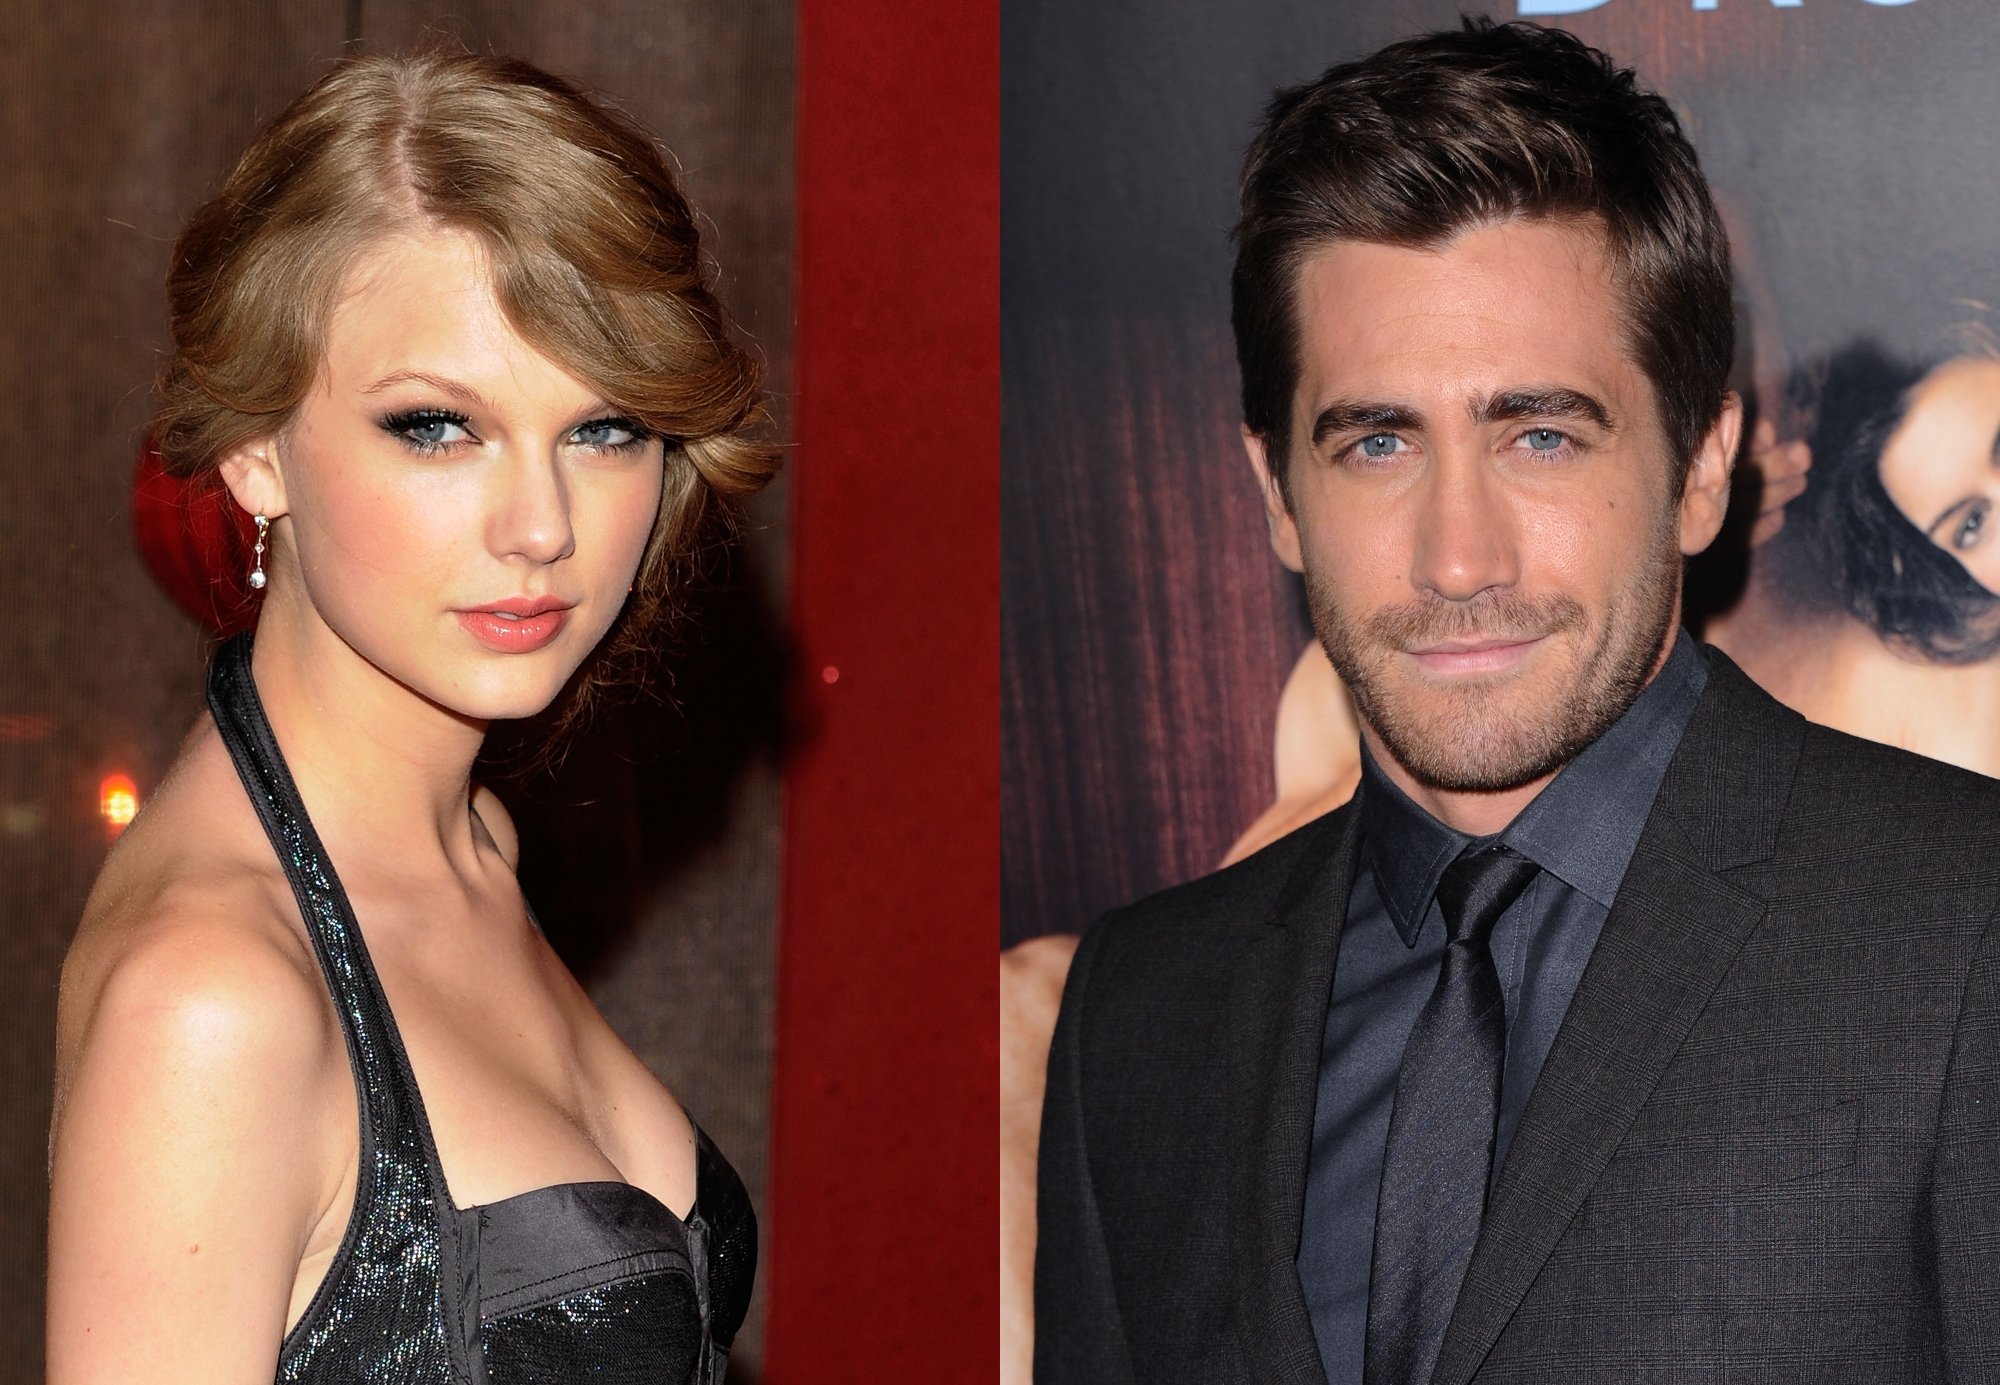 Taylor Swift and Jake Gyllenhaal composite image